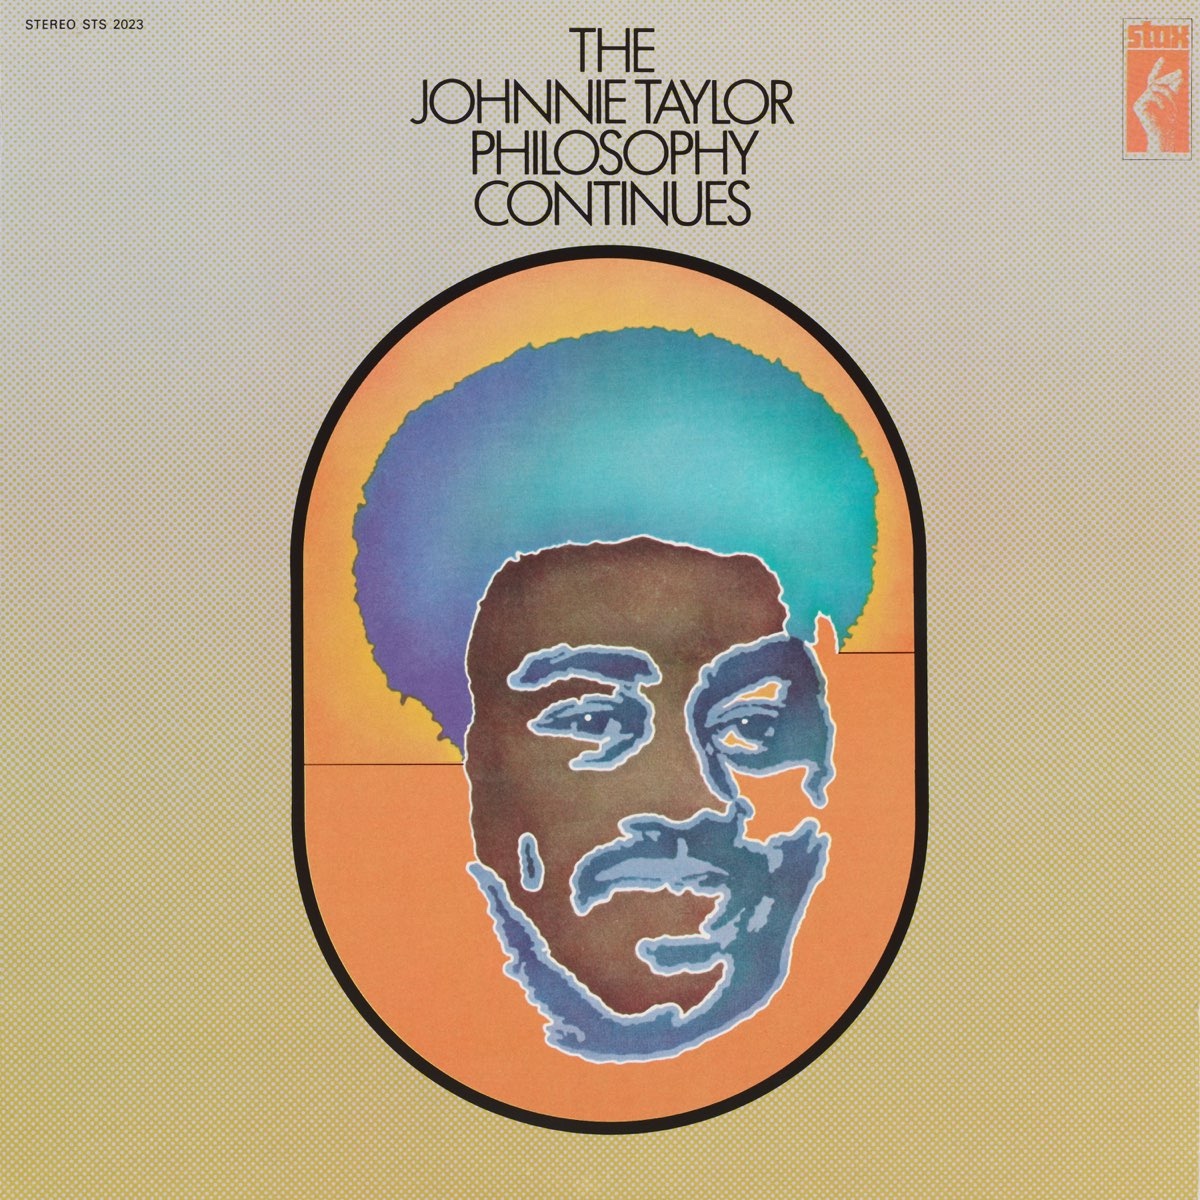 Review of a classic album by Area Resident: Johnnie Taylor | The Johnnie Taylor philosophy continues